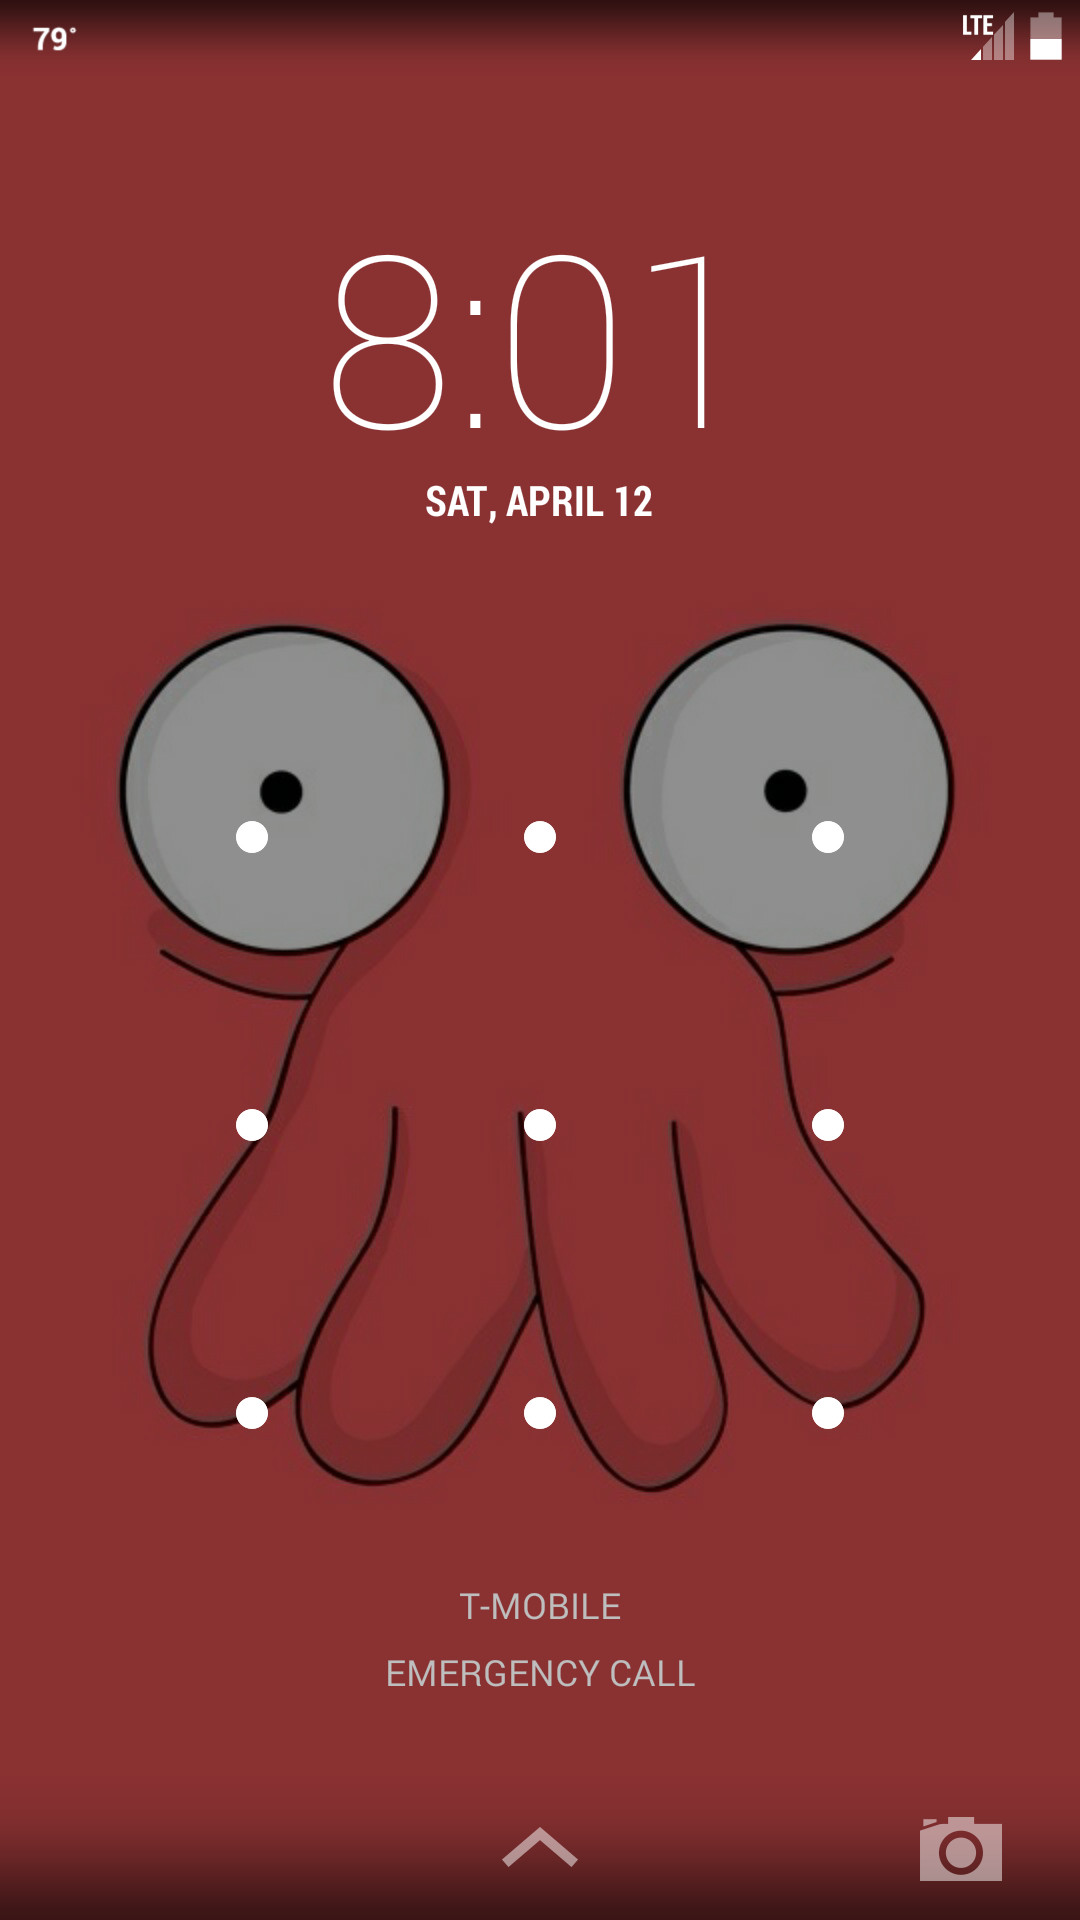 1080x1920 Need a wallpaper? Why not Zoidberg?